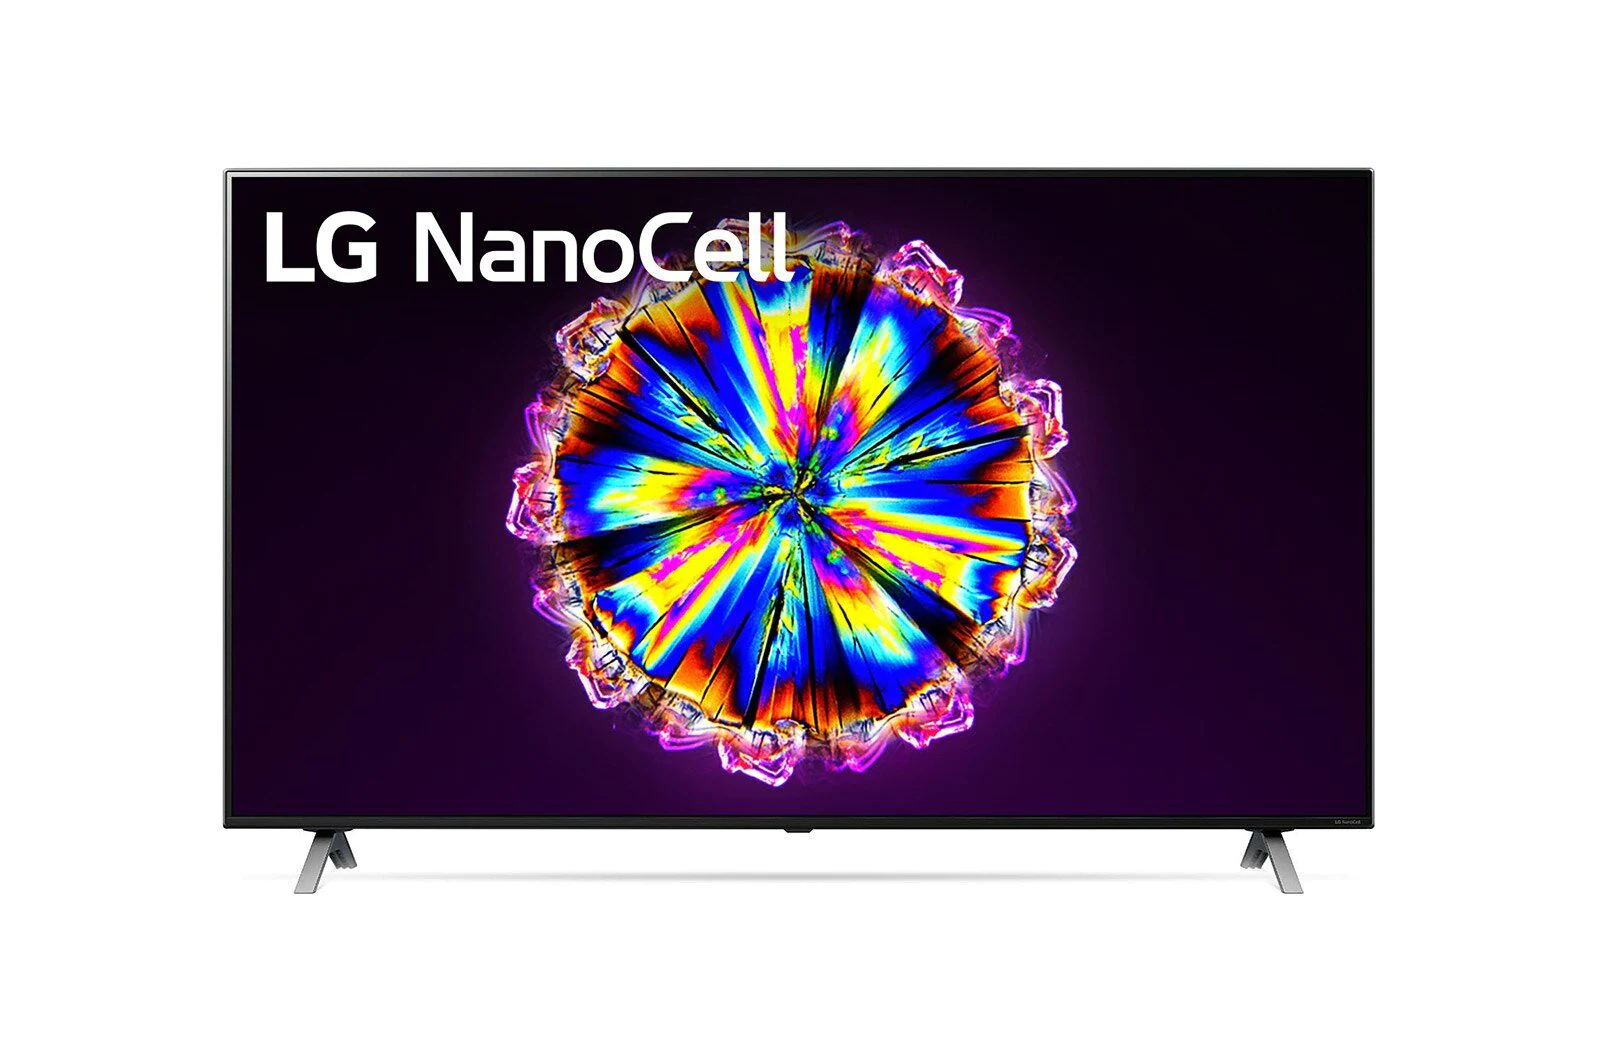 Picture of LG 55" 4K NanoCell Smart TV with ThinQ AI